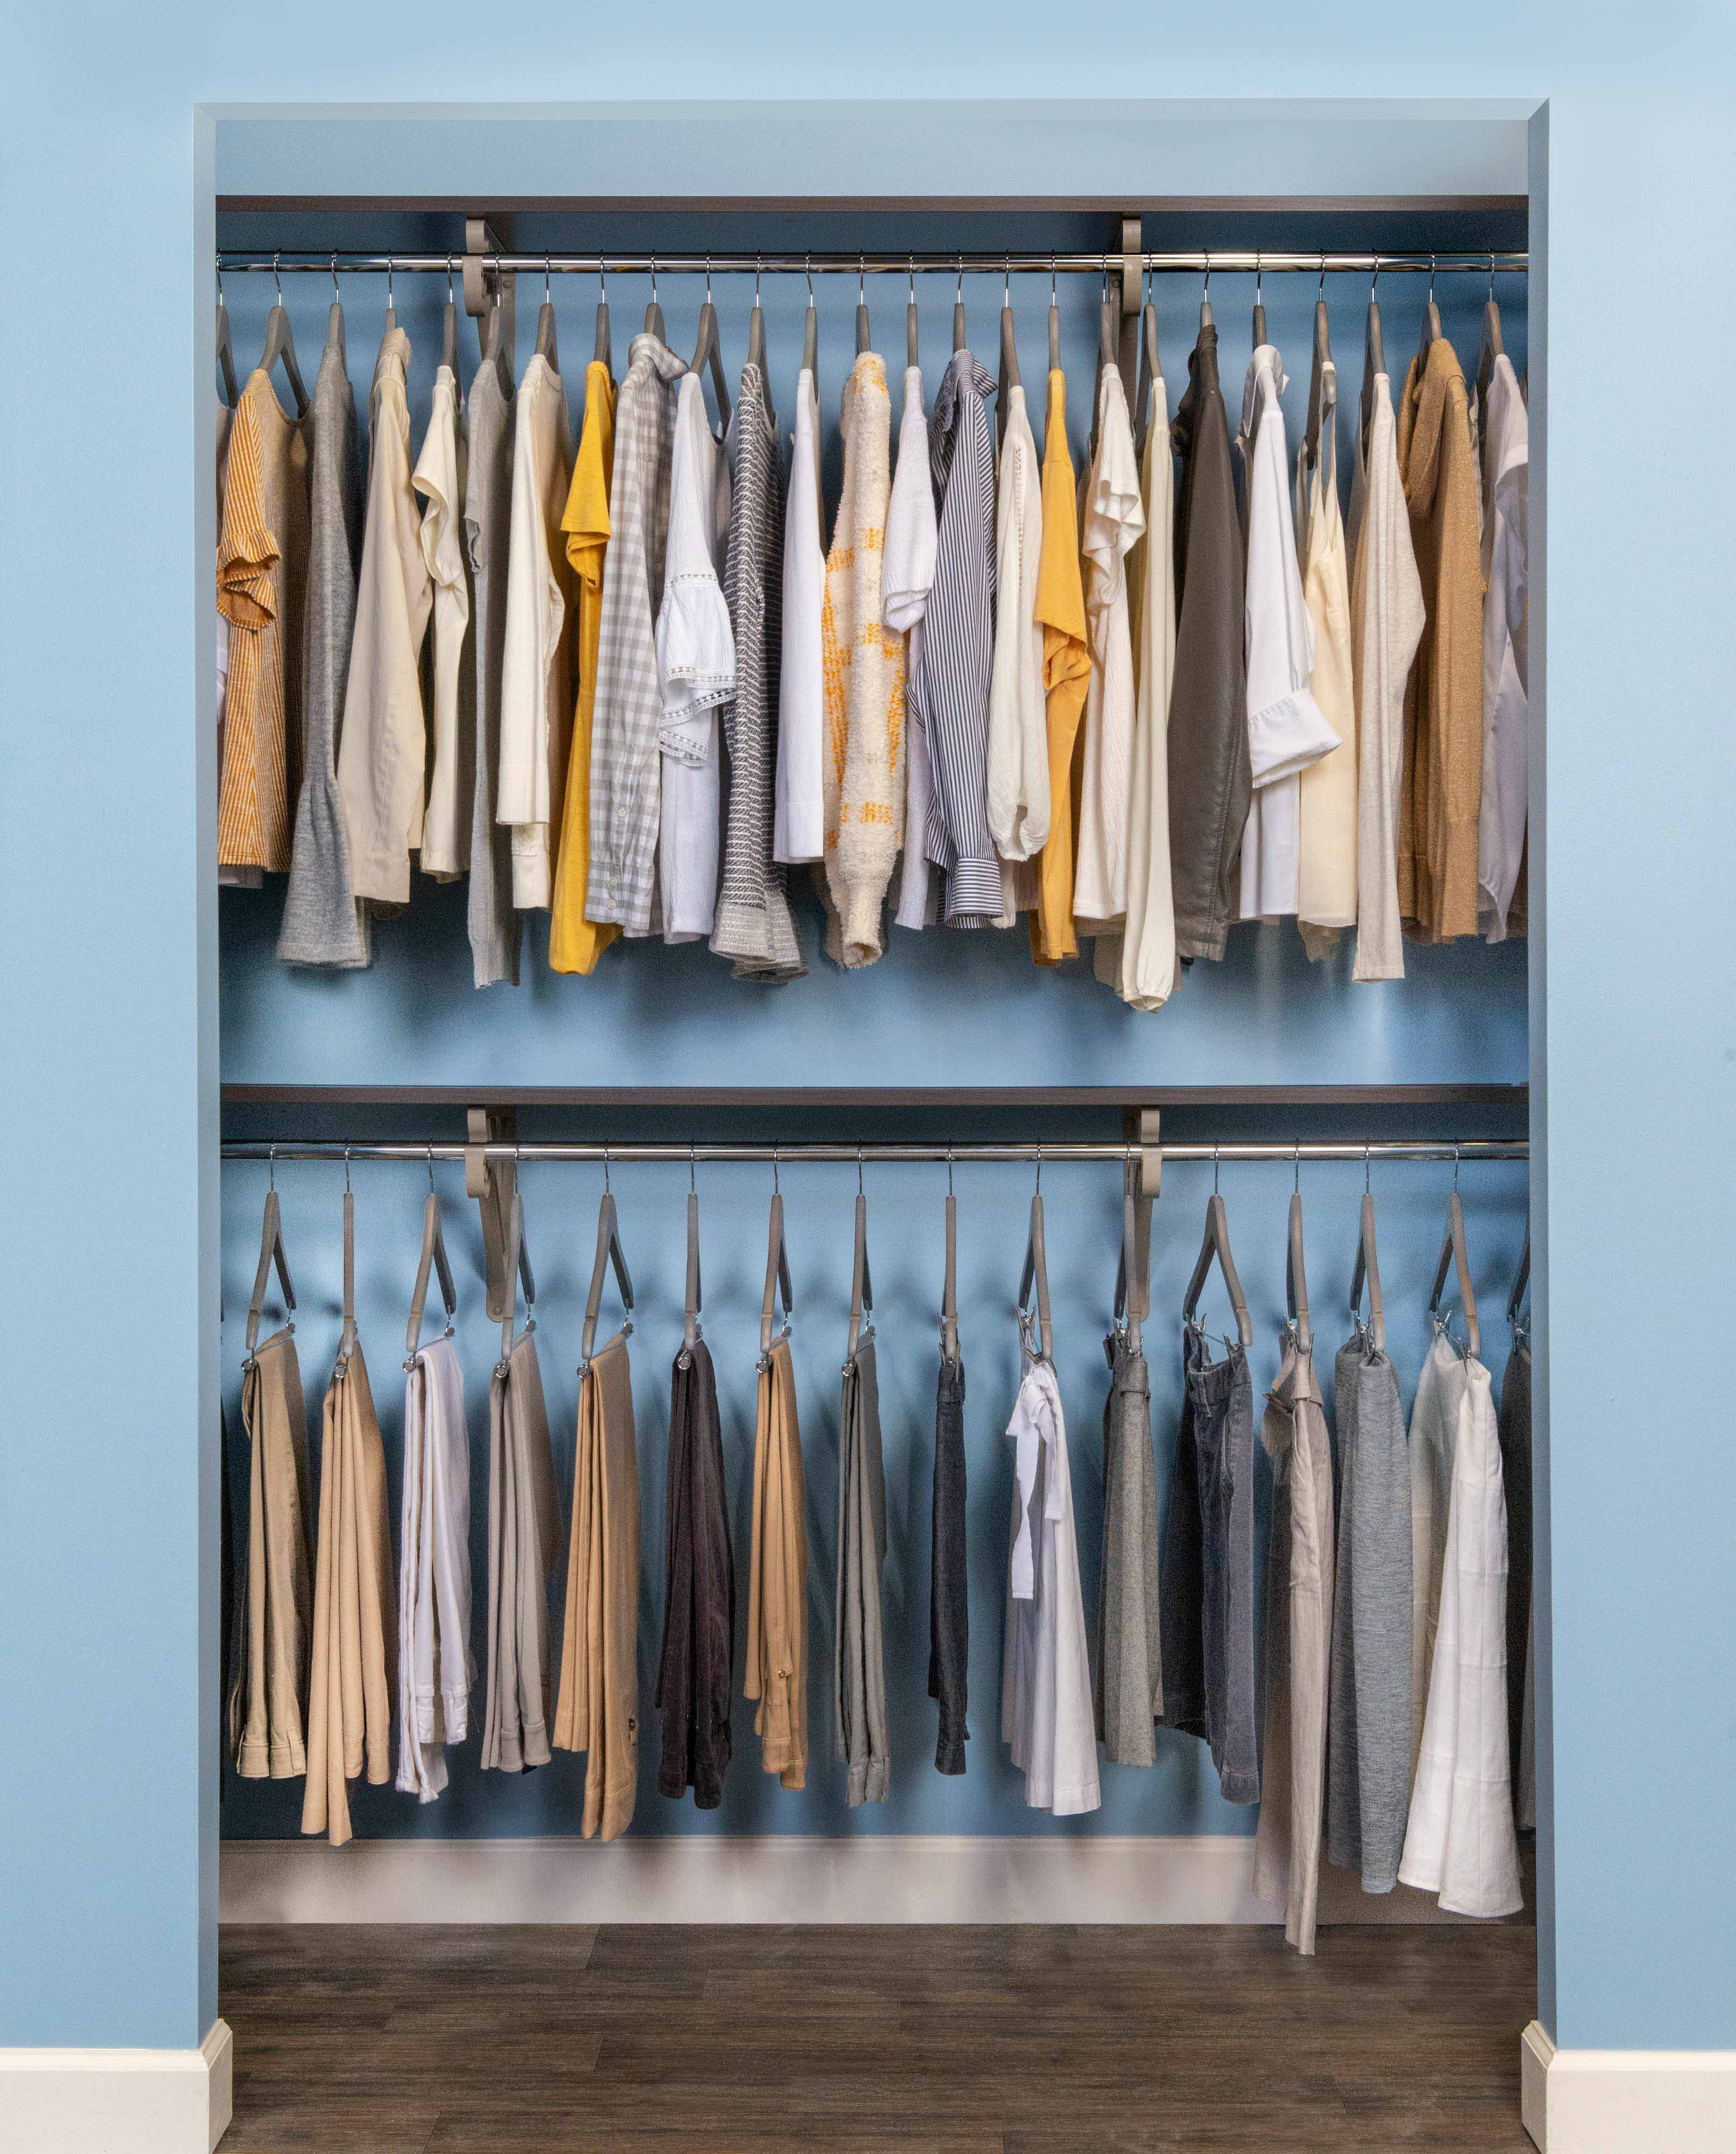 VUE Reach-In Closet in Chocolate Pear with double hang, clothes, hangers with blue wall.